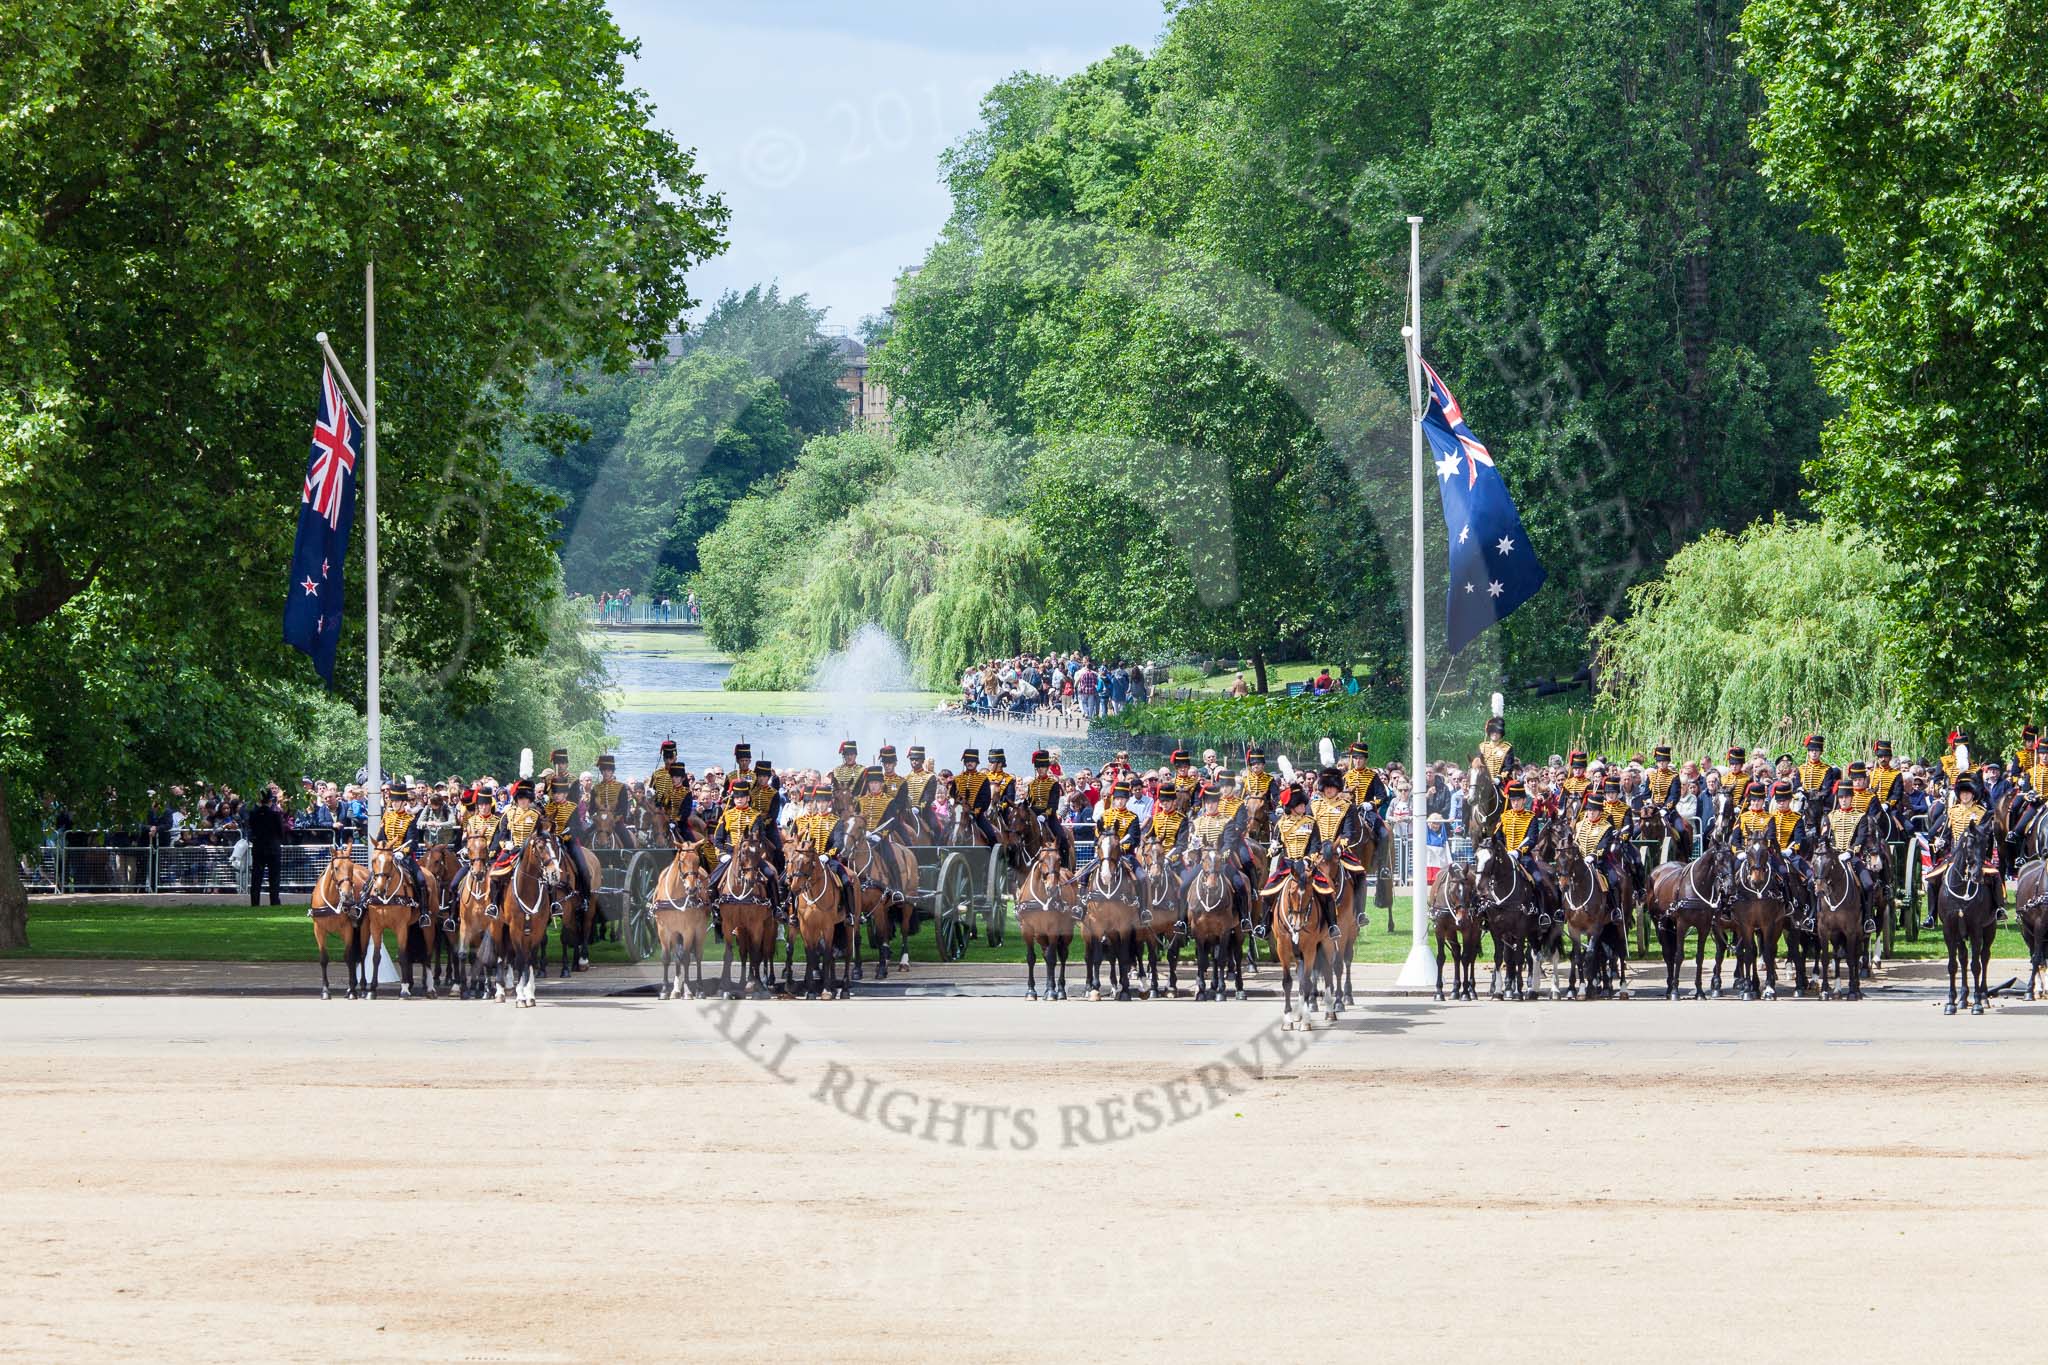 Trooping the Colour 2013: The King's Troop Royal Horse Artillery at their position in front of St James's Park Lake. Image #619, 15 June 2013 11:48 Horse Guards Parade, London, UK